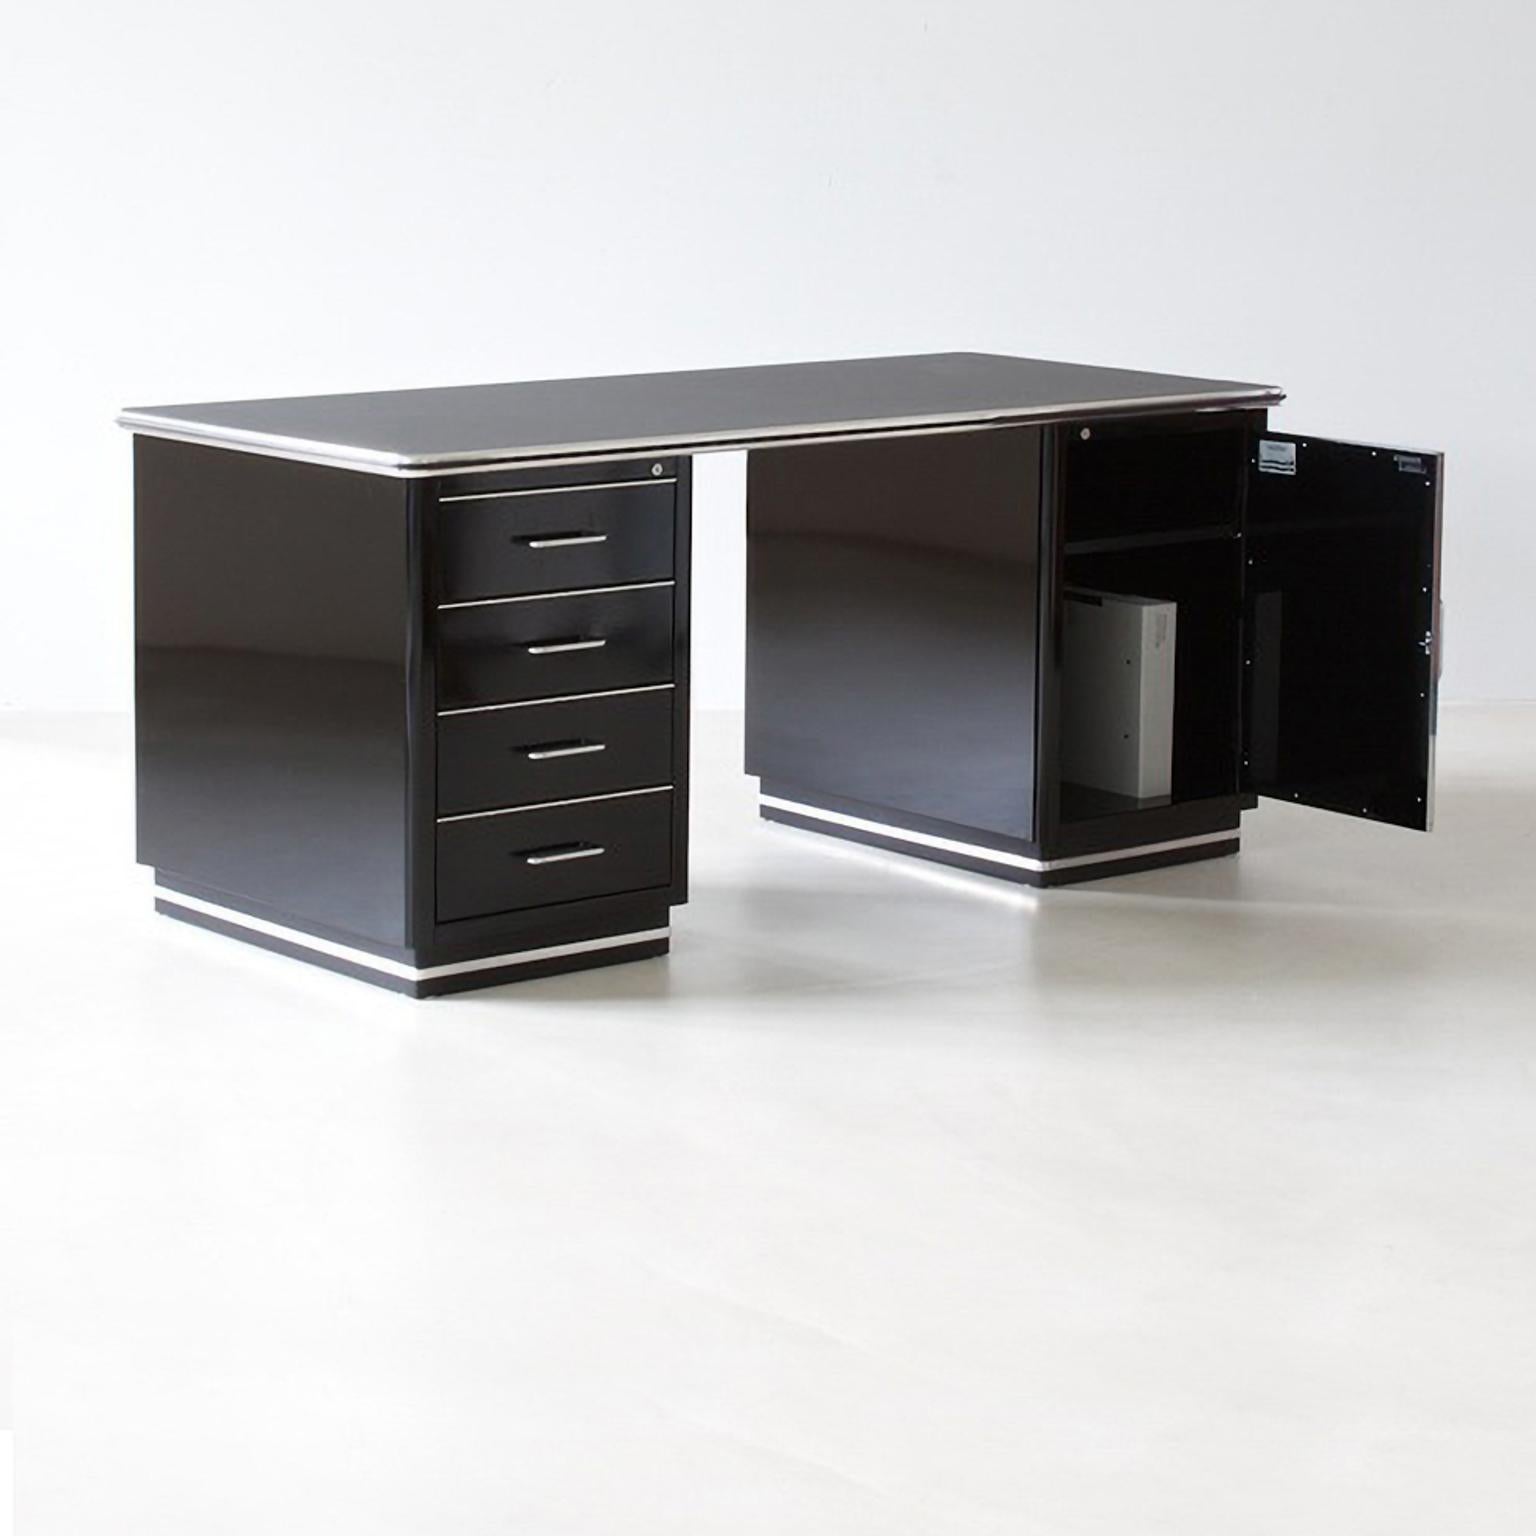 Bespoke Executive Metal Desk, Lacquered Metal, Industrial Design, Germany, 2018 In New Condition For Sale In Berlin, DE